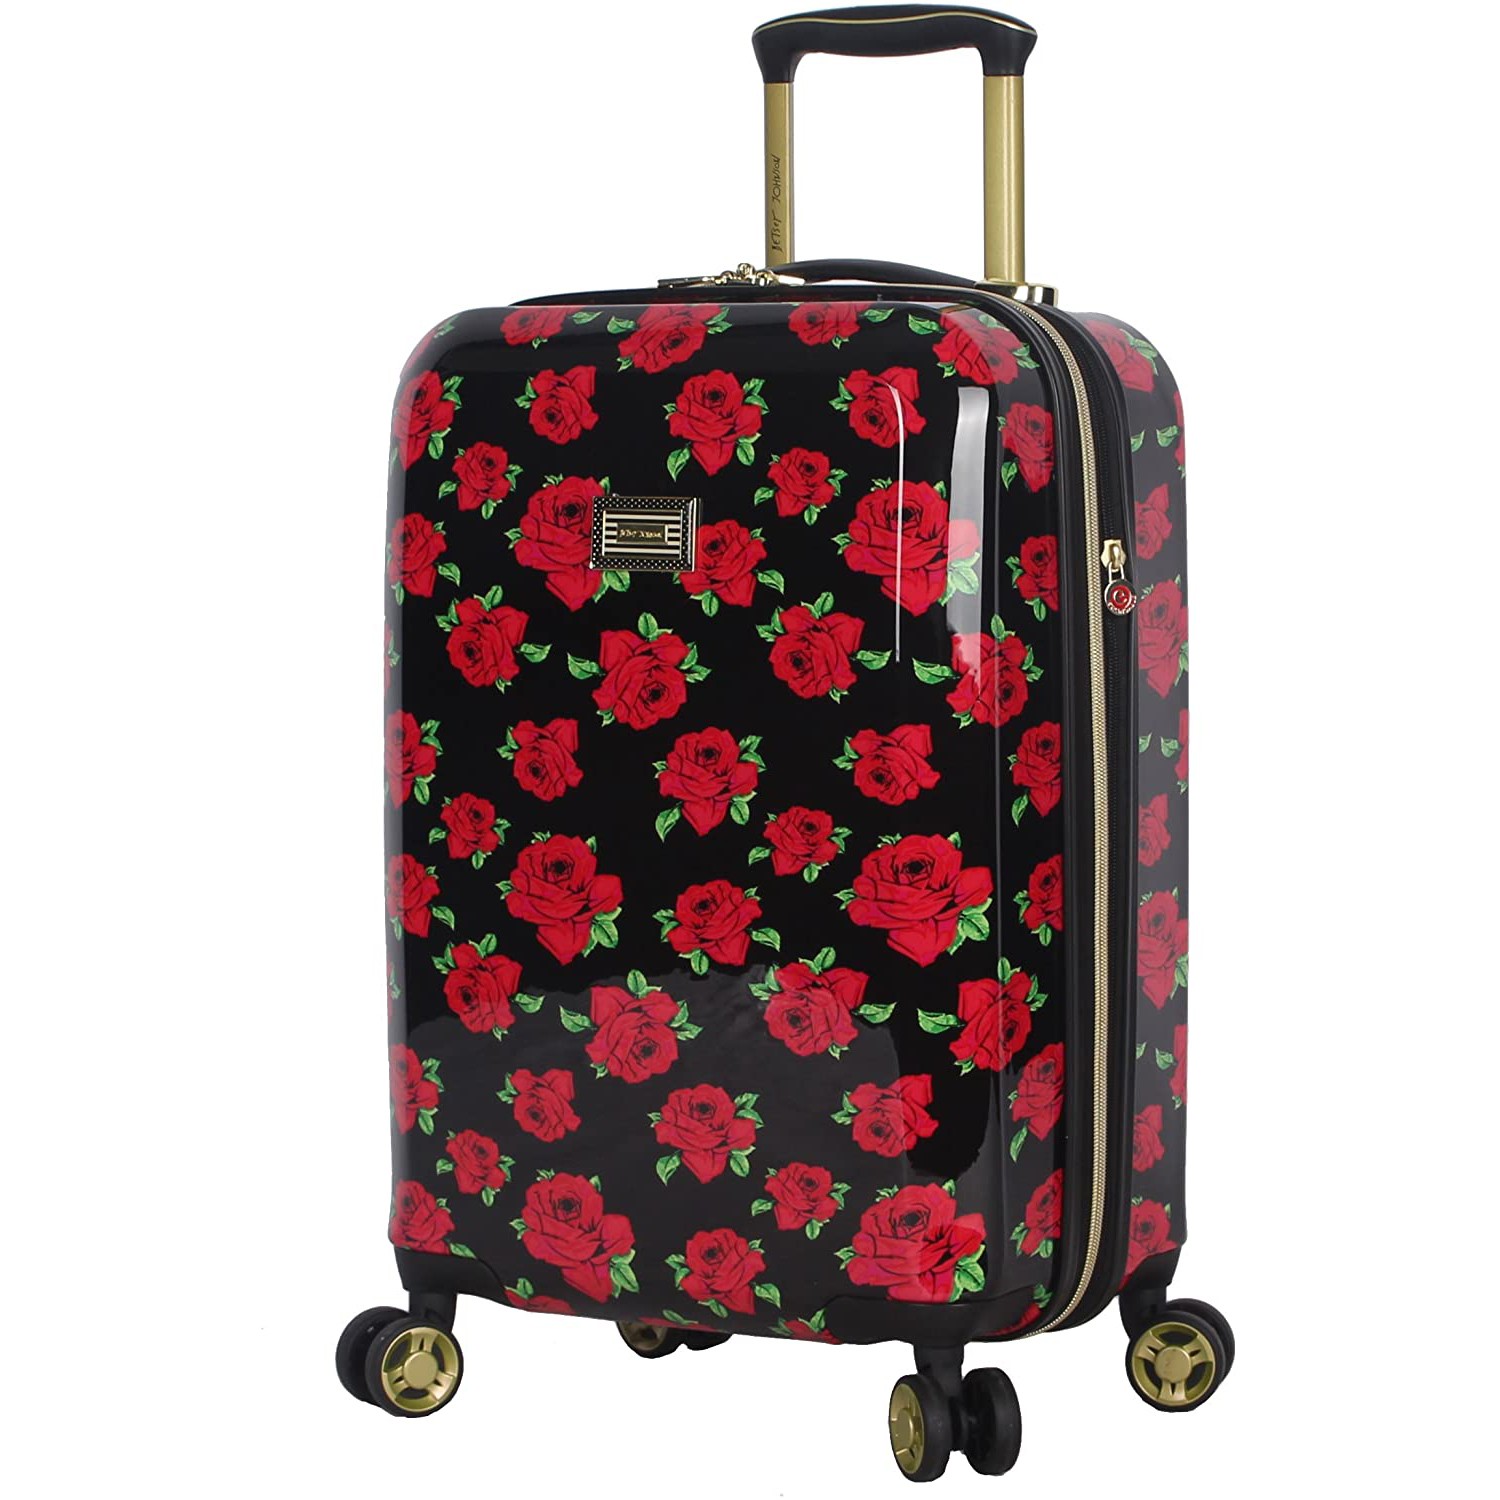 Lightweight hard shell suitcase with funny quote